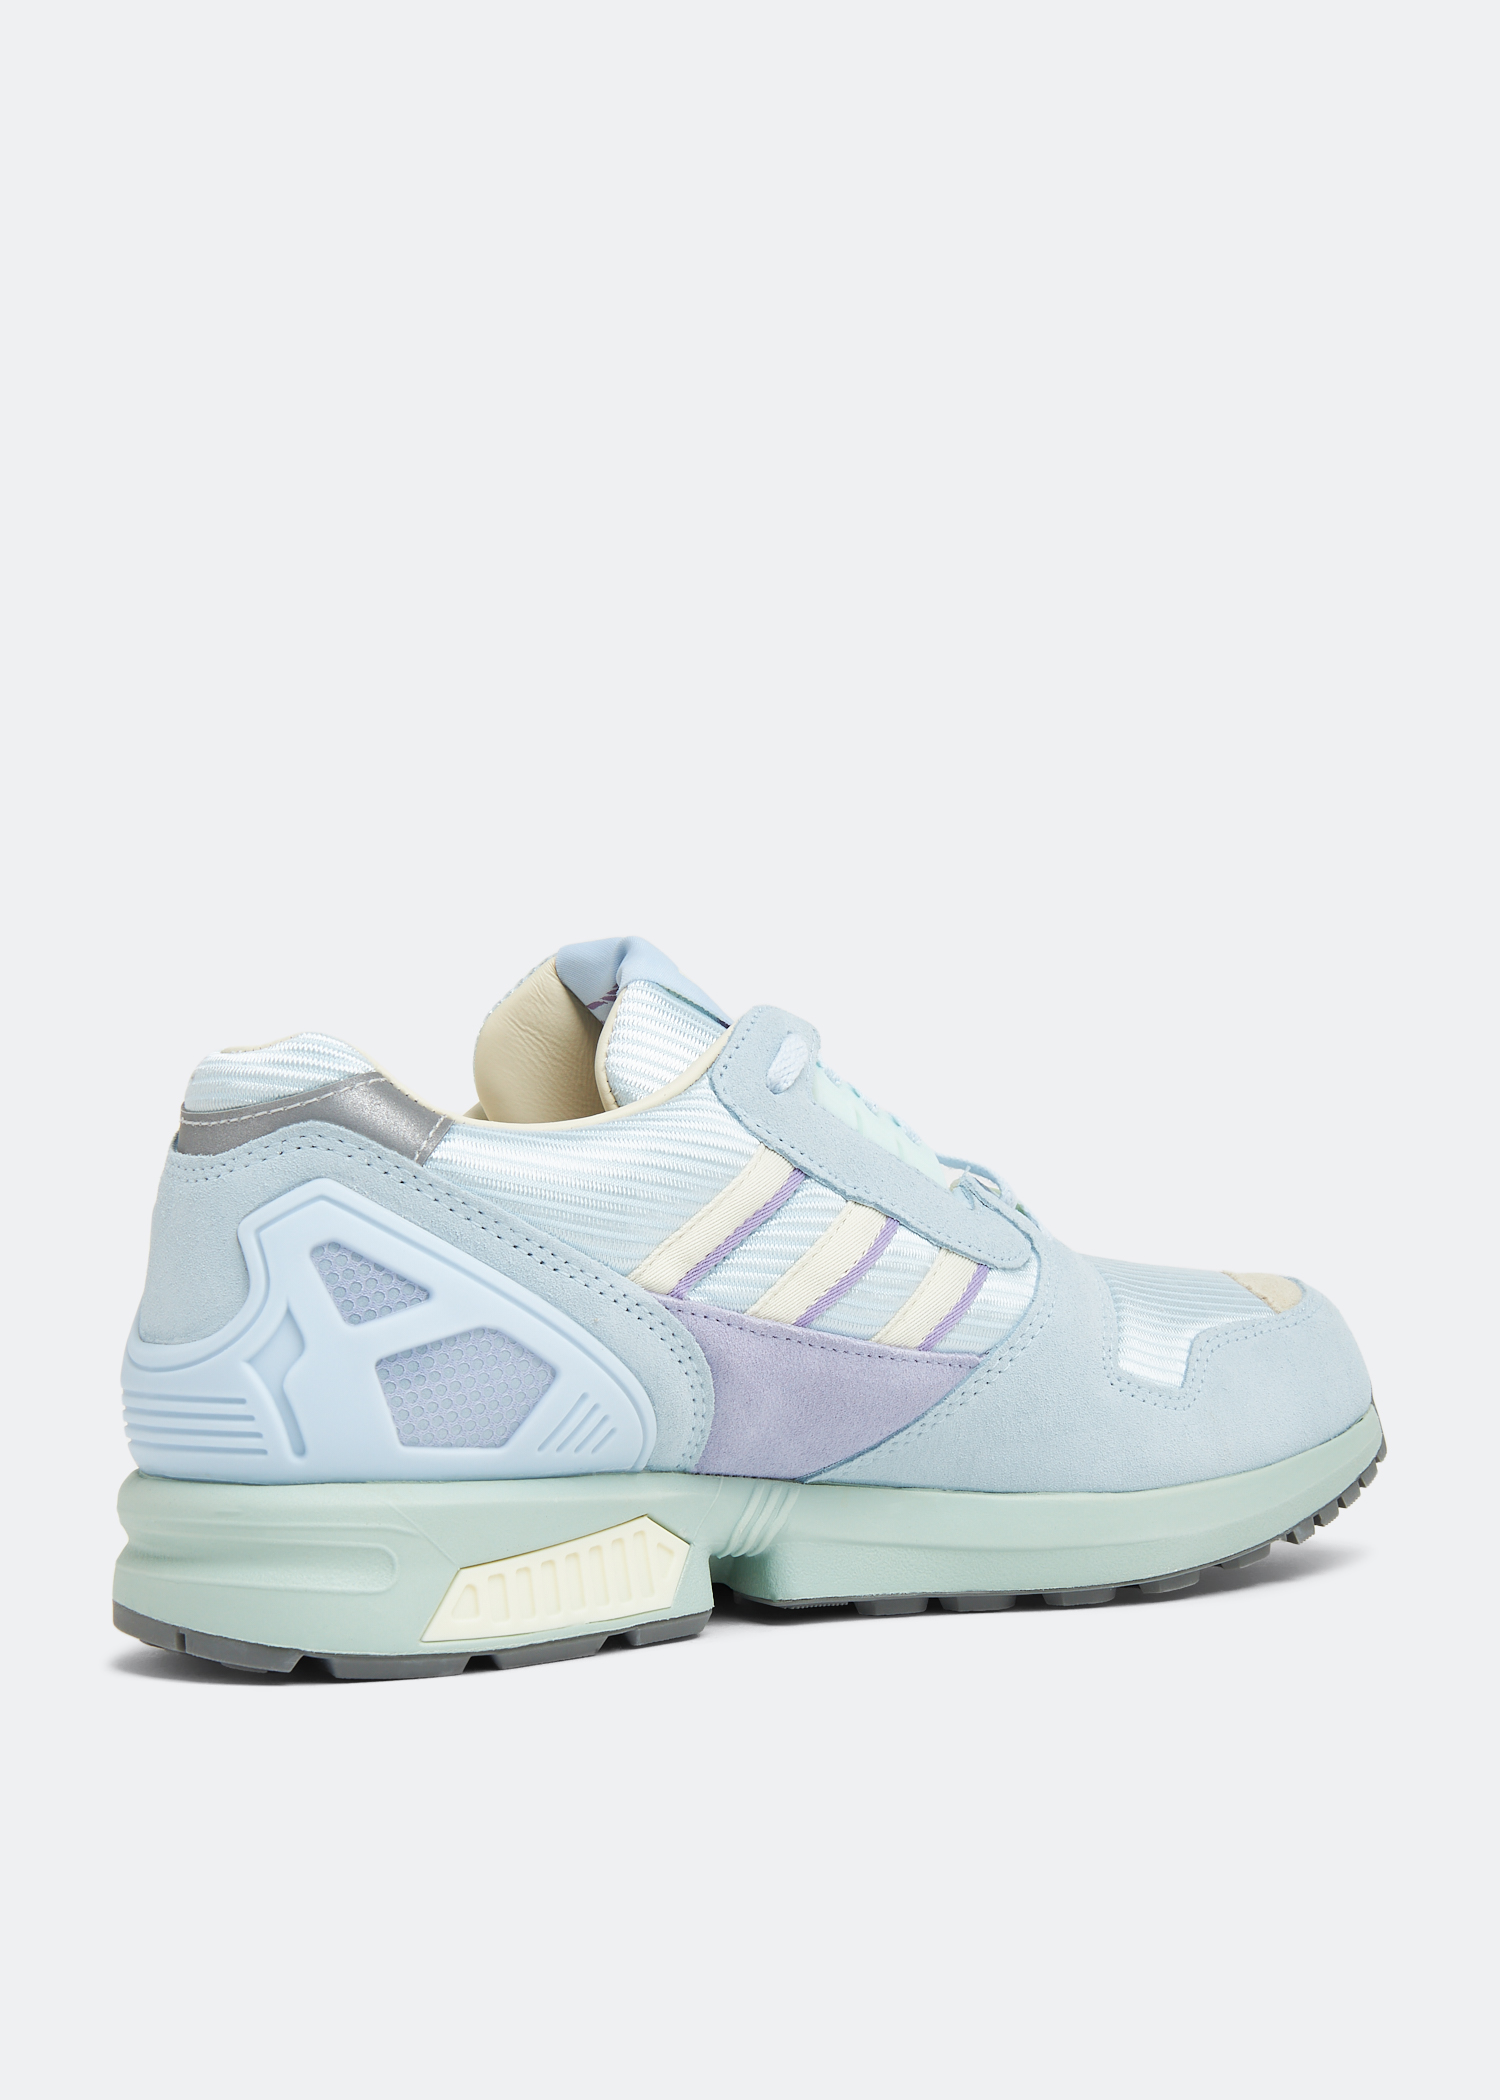 Adidas ZX 8000 sneakers for Men - Blue in KSA | Level Shoes